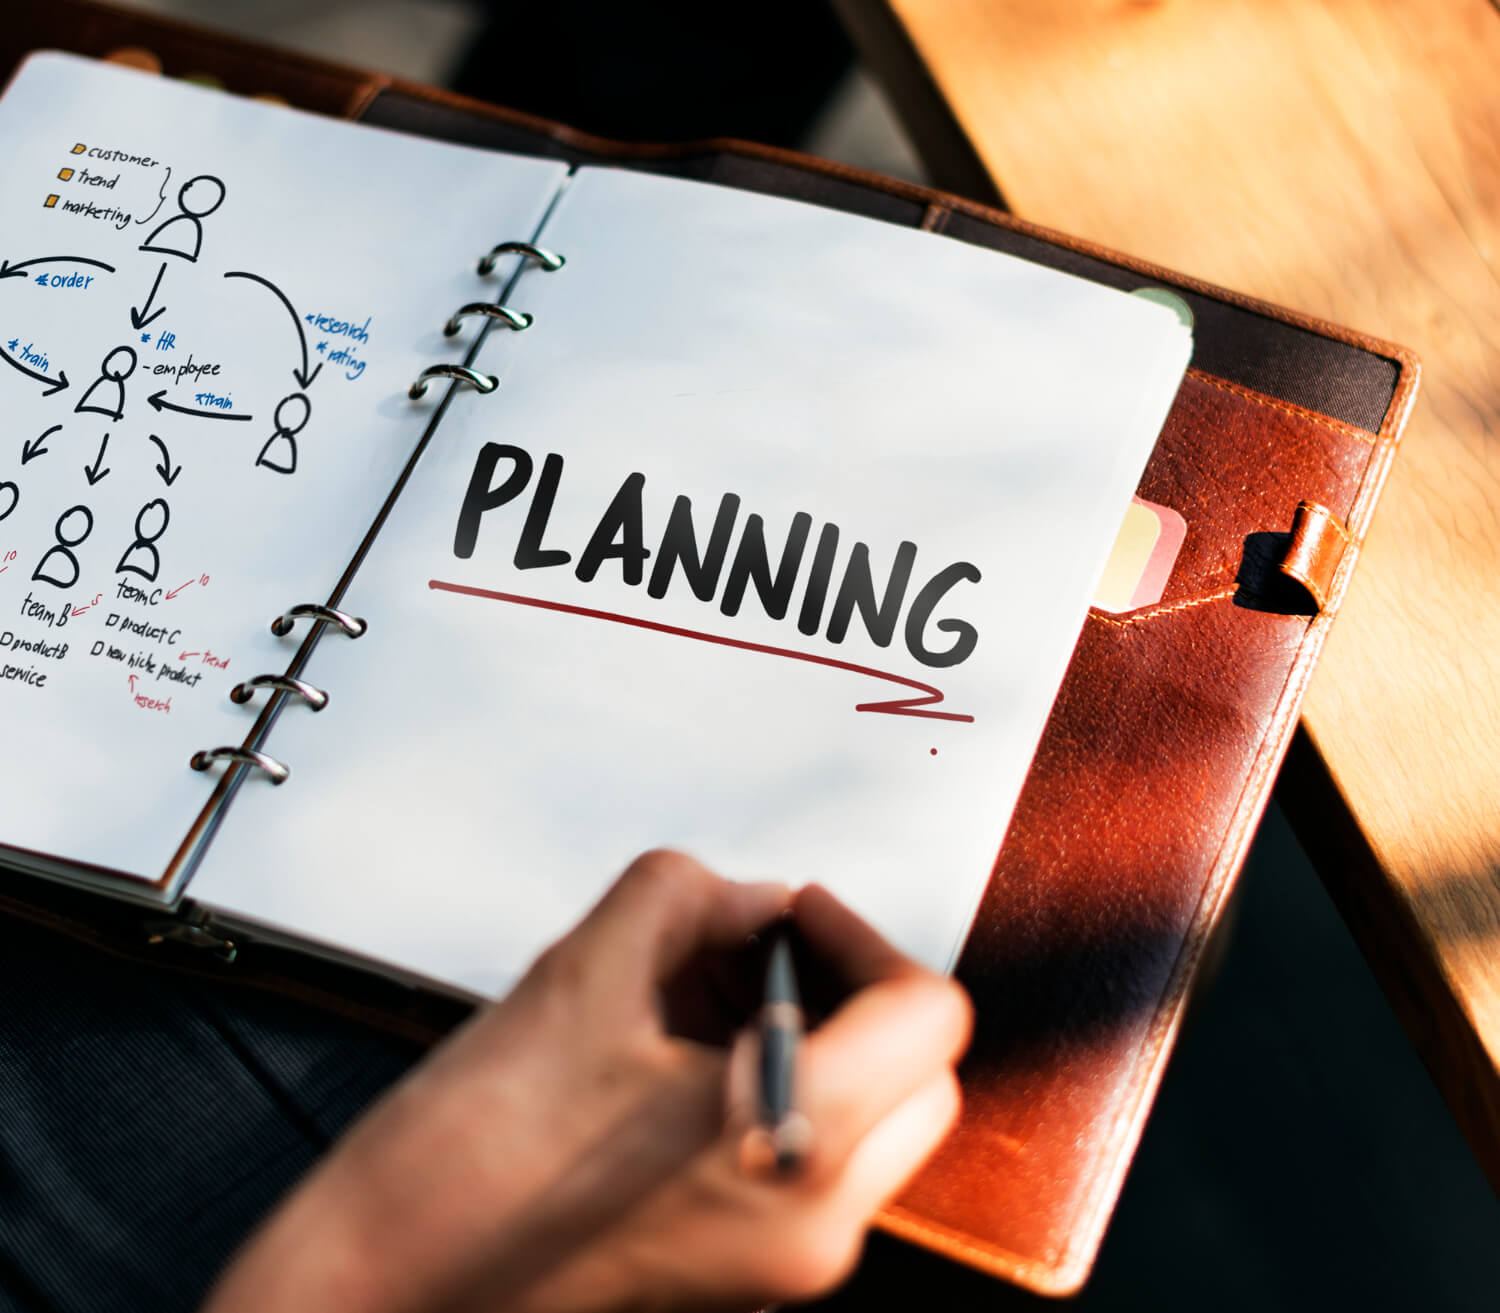 Customizing Strategic Planning (Part 2 of 4)– Quiz to Test Your Knowledge